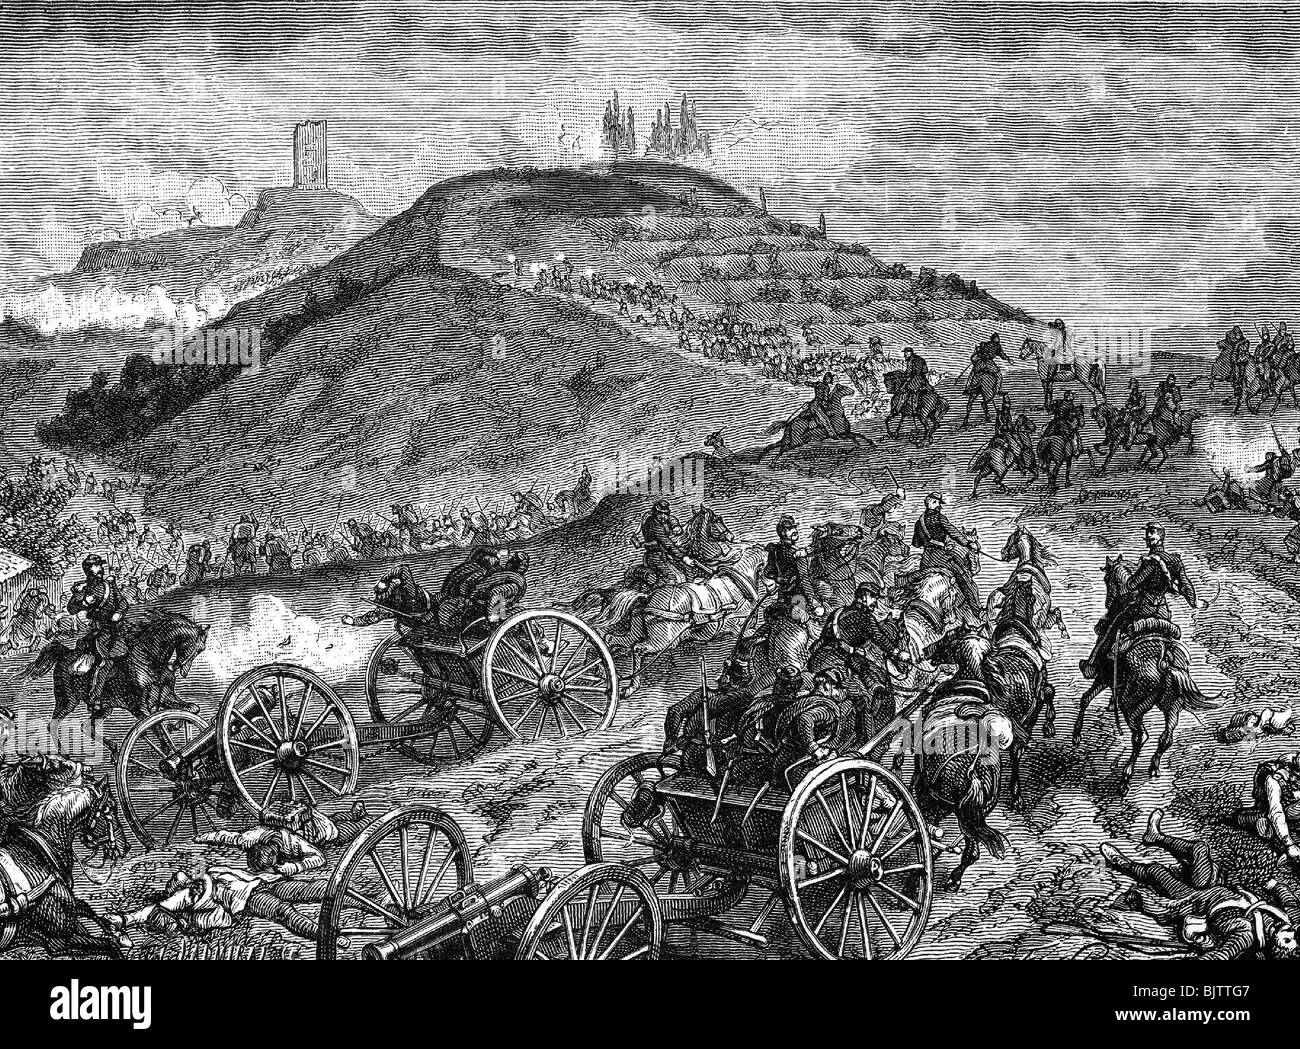 evsnts, Second Italian War of Independence 1859, Battle of Solferino, 24.6.1859, French artillery developing, wood engraving, 19th century, Italy, Unification Wars, French, France, Lombardy, Risorgimento, historic, historical, people, Stock Photo